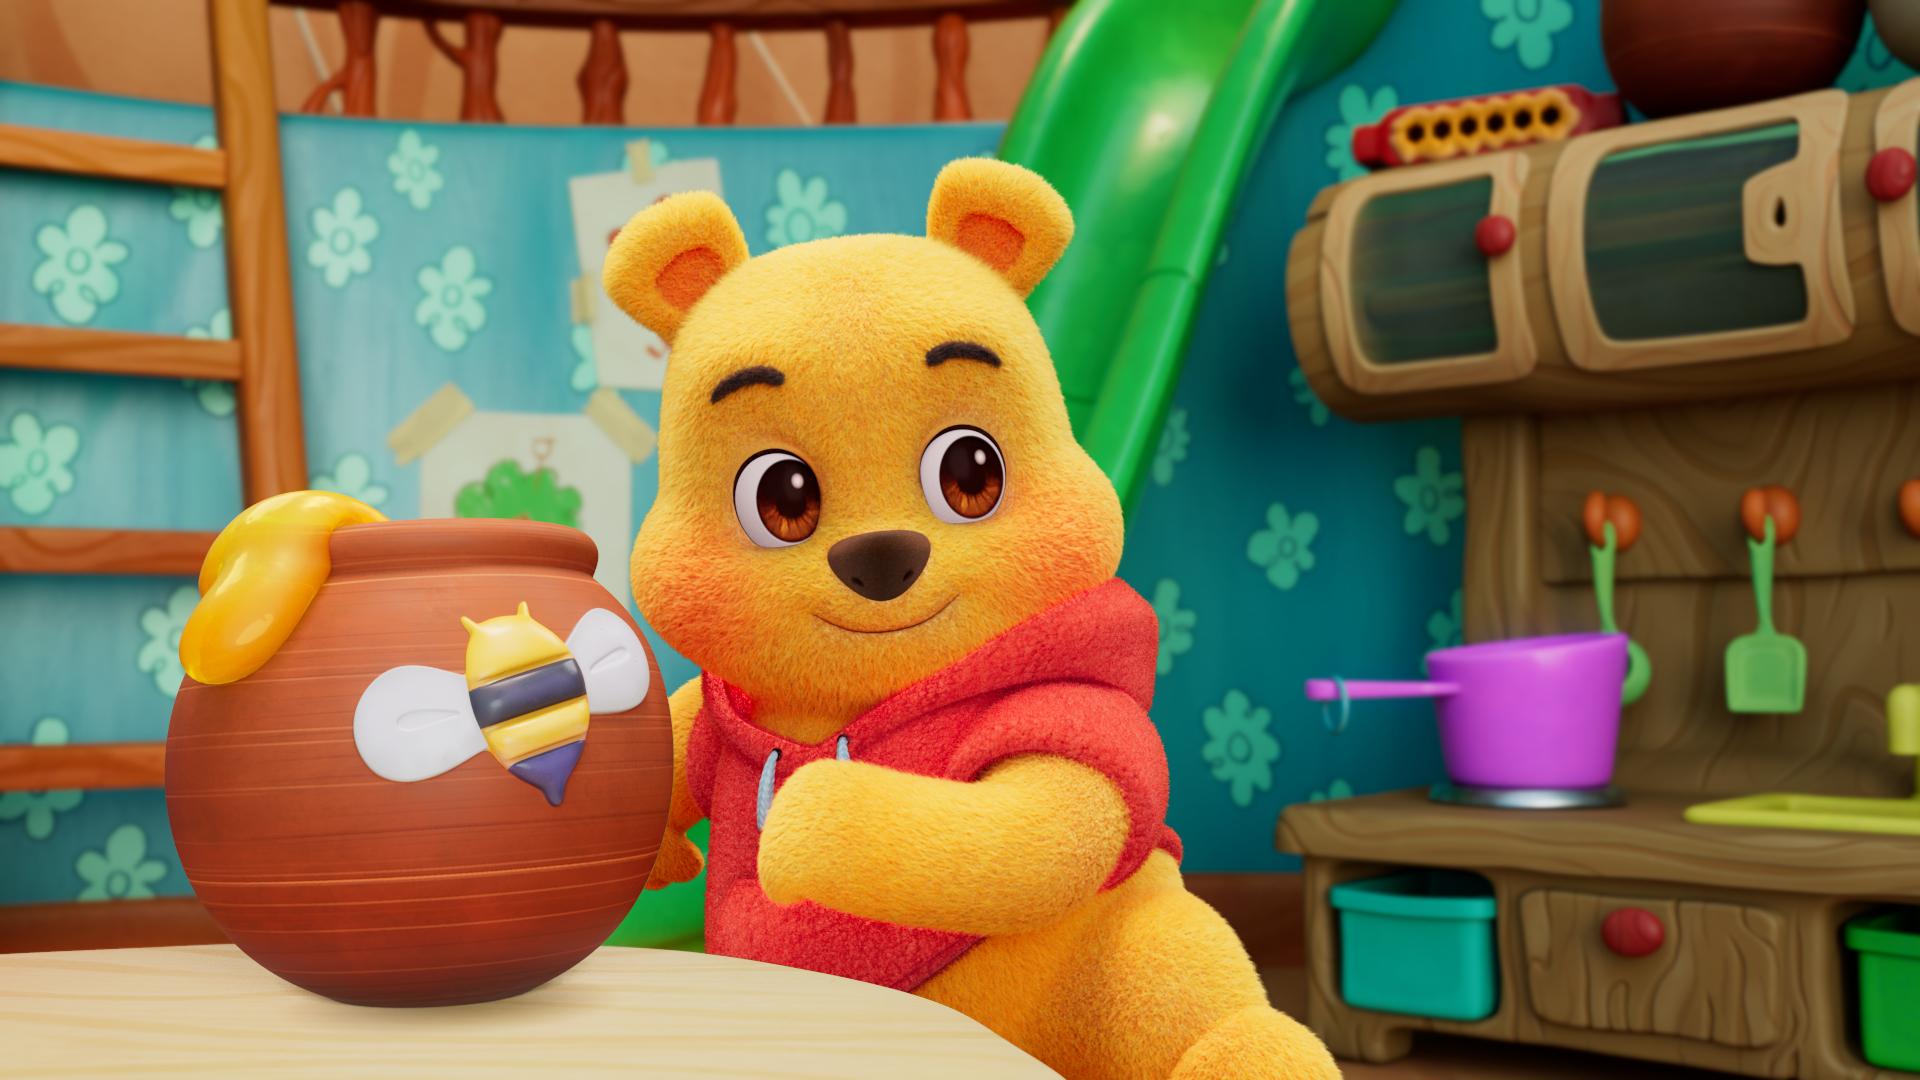 “Playdate with Winnie the Pooh” Announced for Disney Junior and Disney+